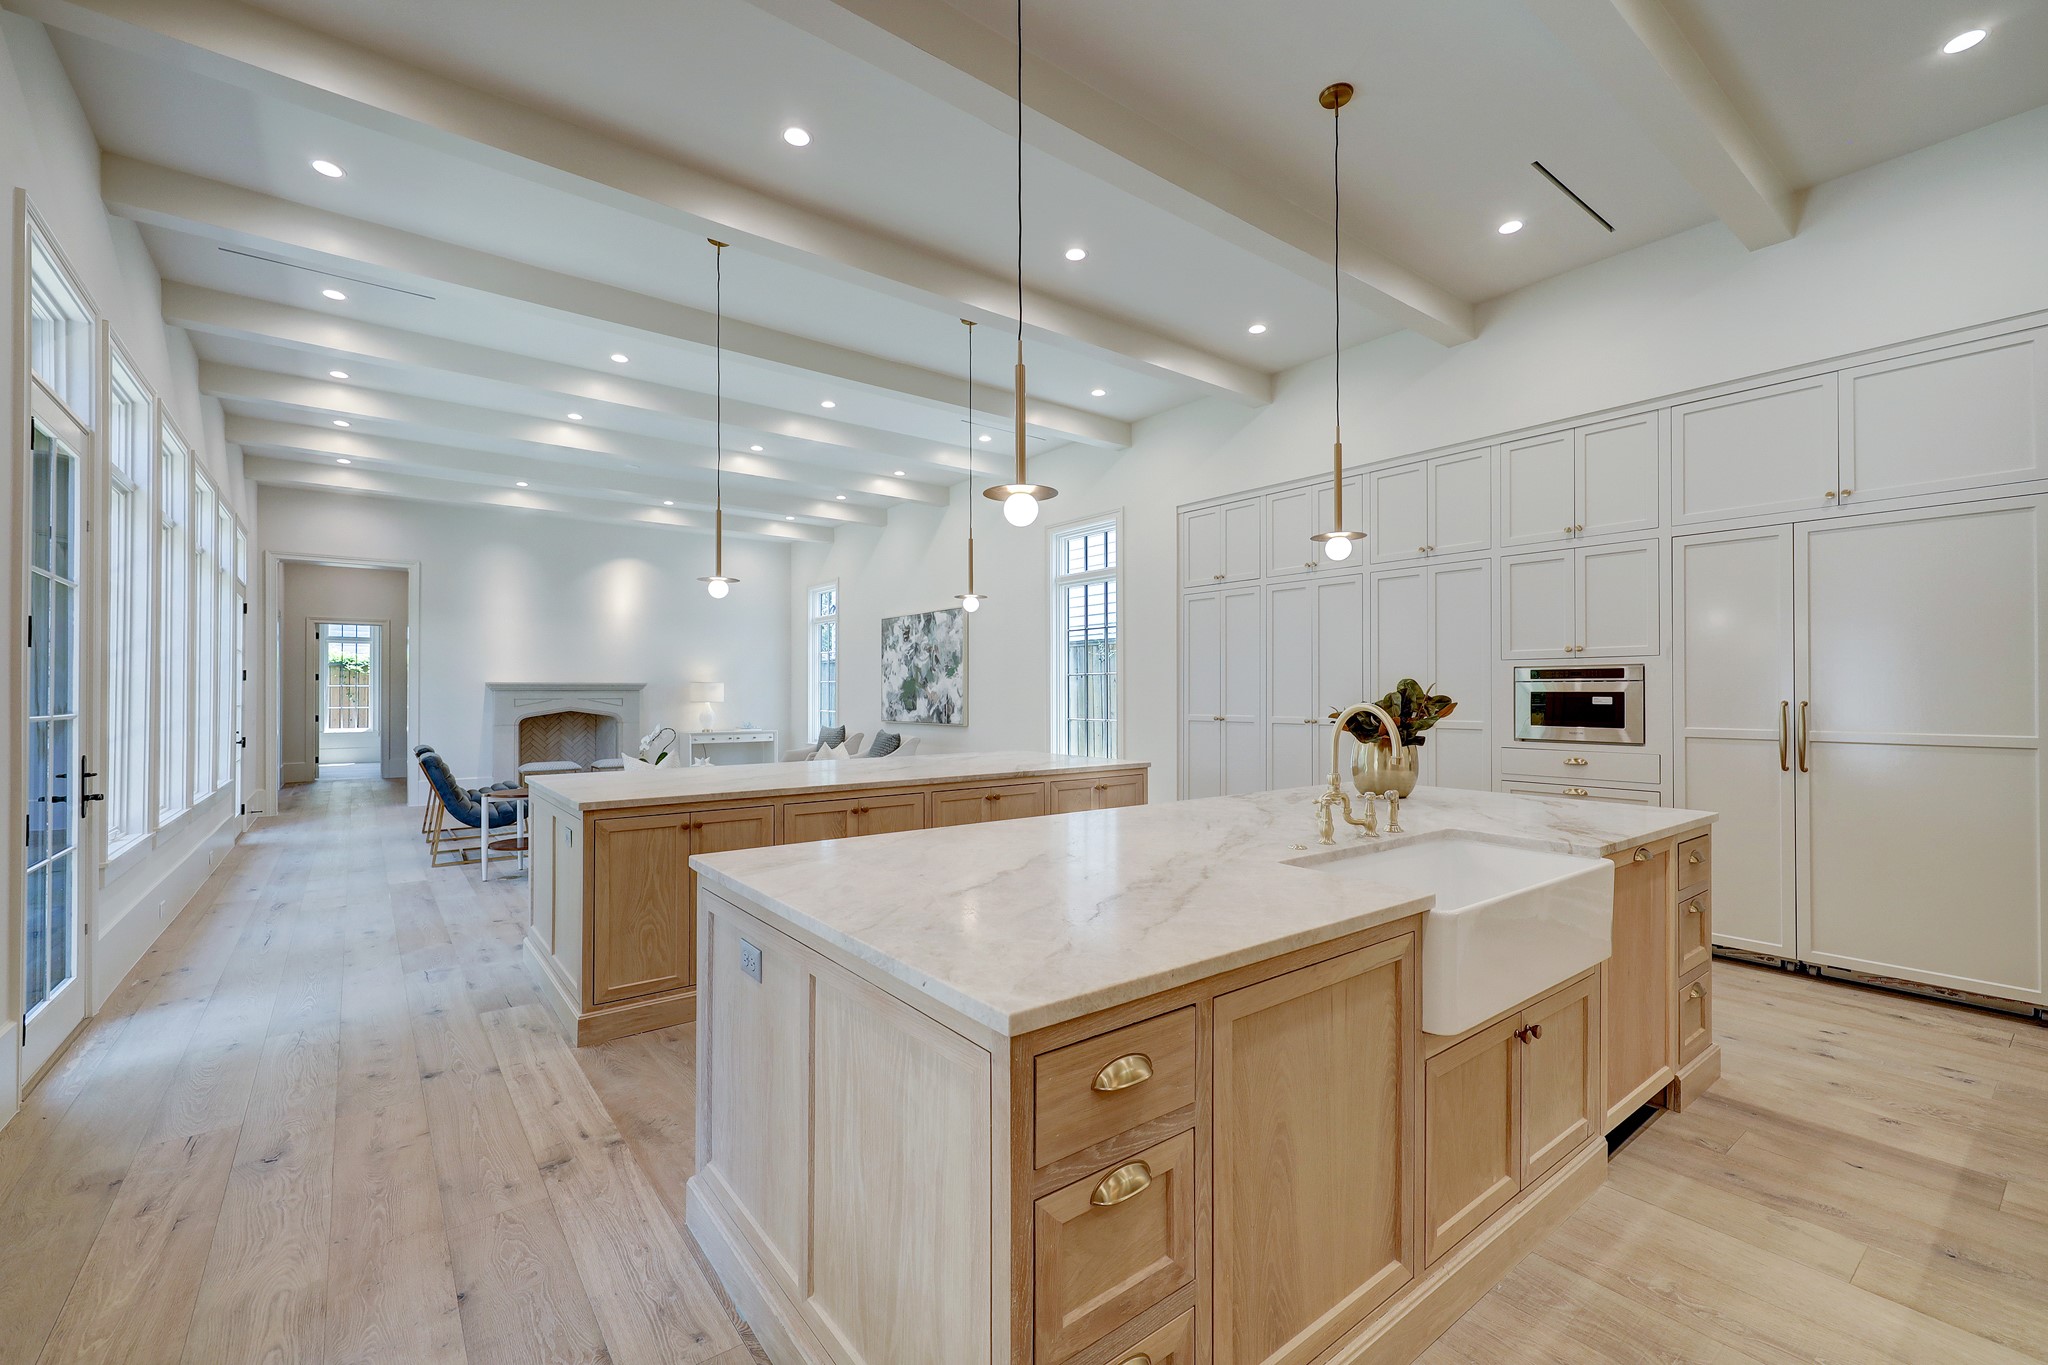 Stunning chef's kitchen with two islands with white oak cabinetry, Tahj Mahal quartzite countertops, fleet of upscale appliances, and satin brass cabinet hardware.